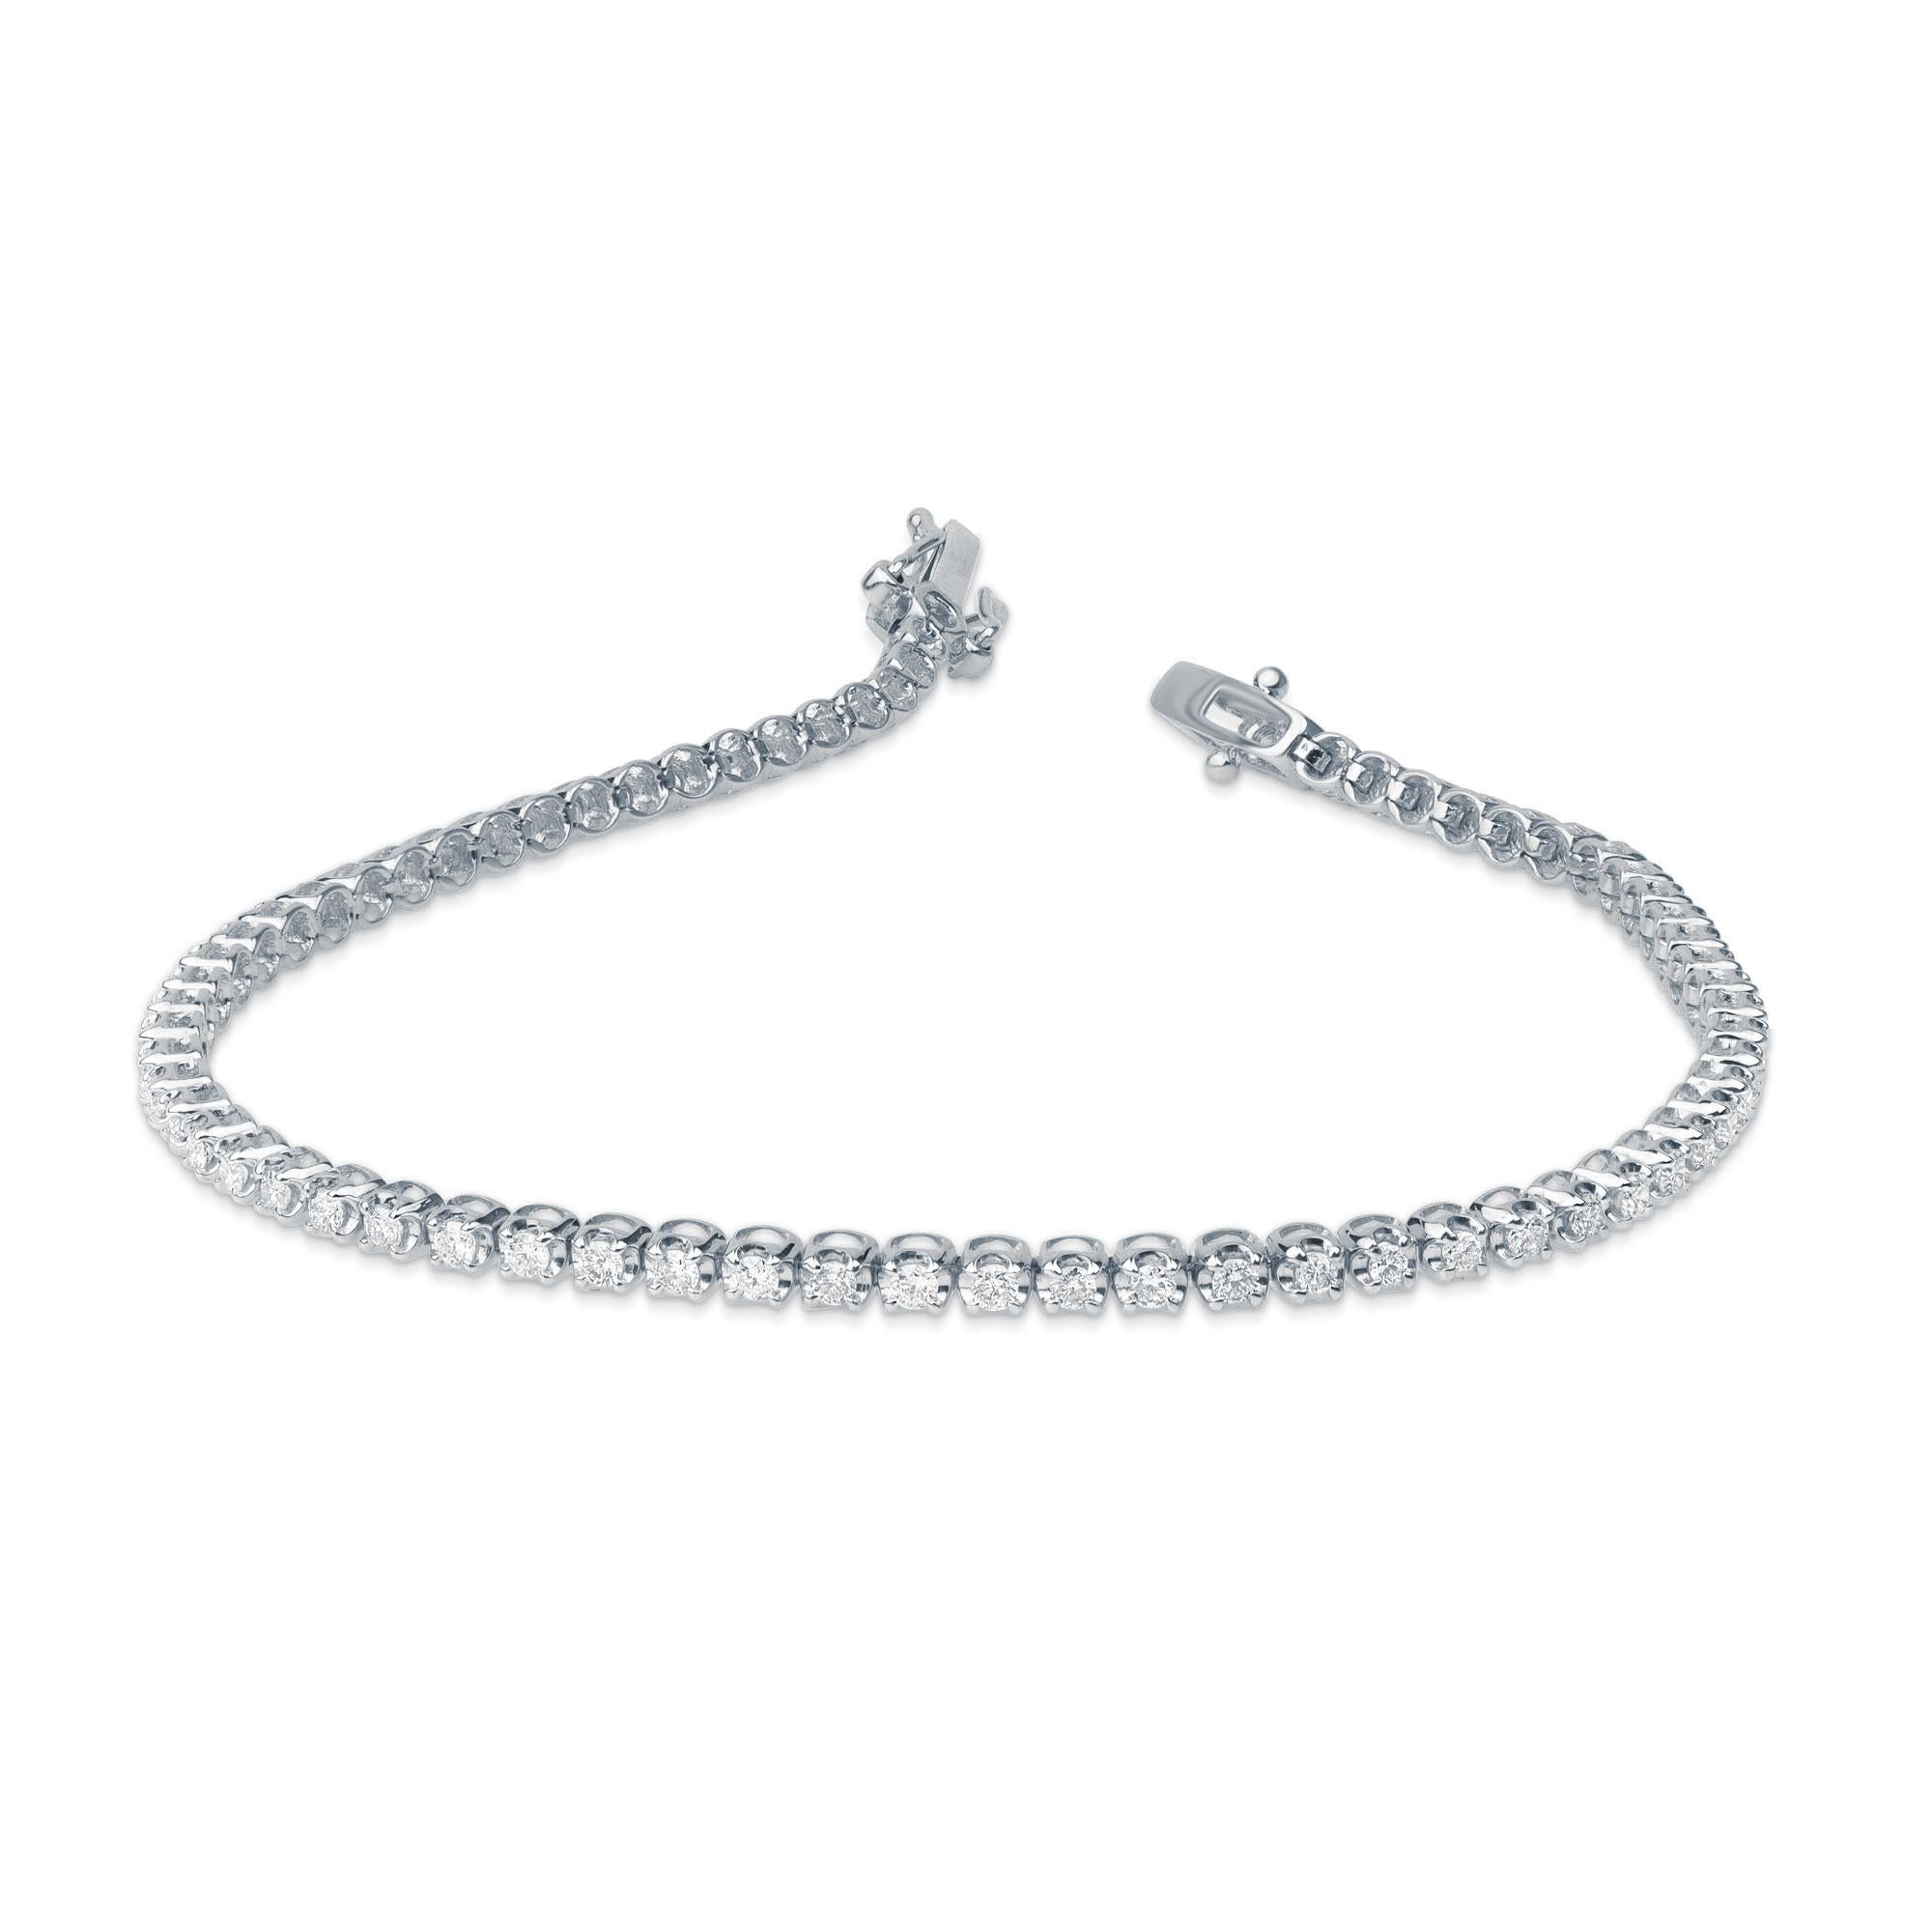 A classic tennis bracelet – perfect accessory for women with everyday attire. Elegantly designed in 10 kt white gold and embellished with 72 brilliant natural diamonds in prong setting. Diamonds are graded H-I Color, I2 Clarity. 
